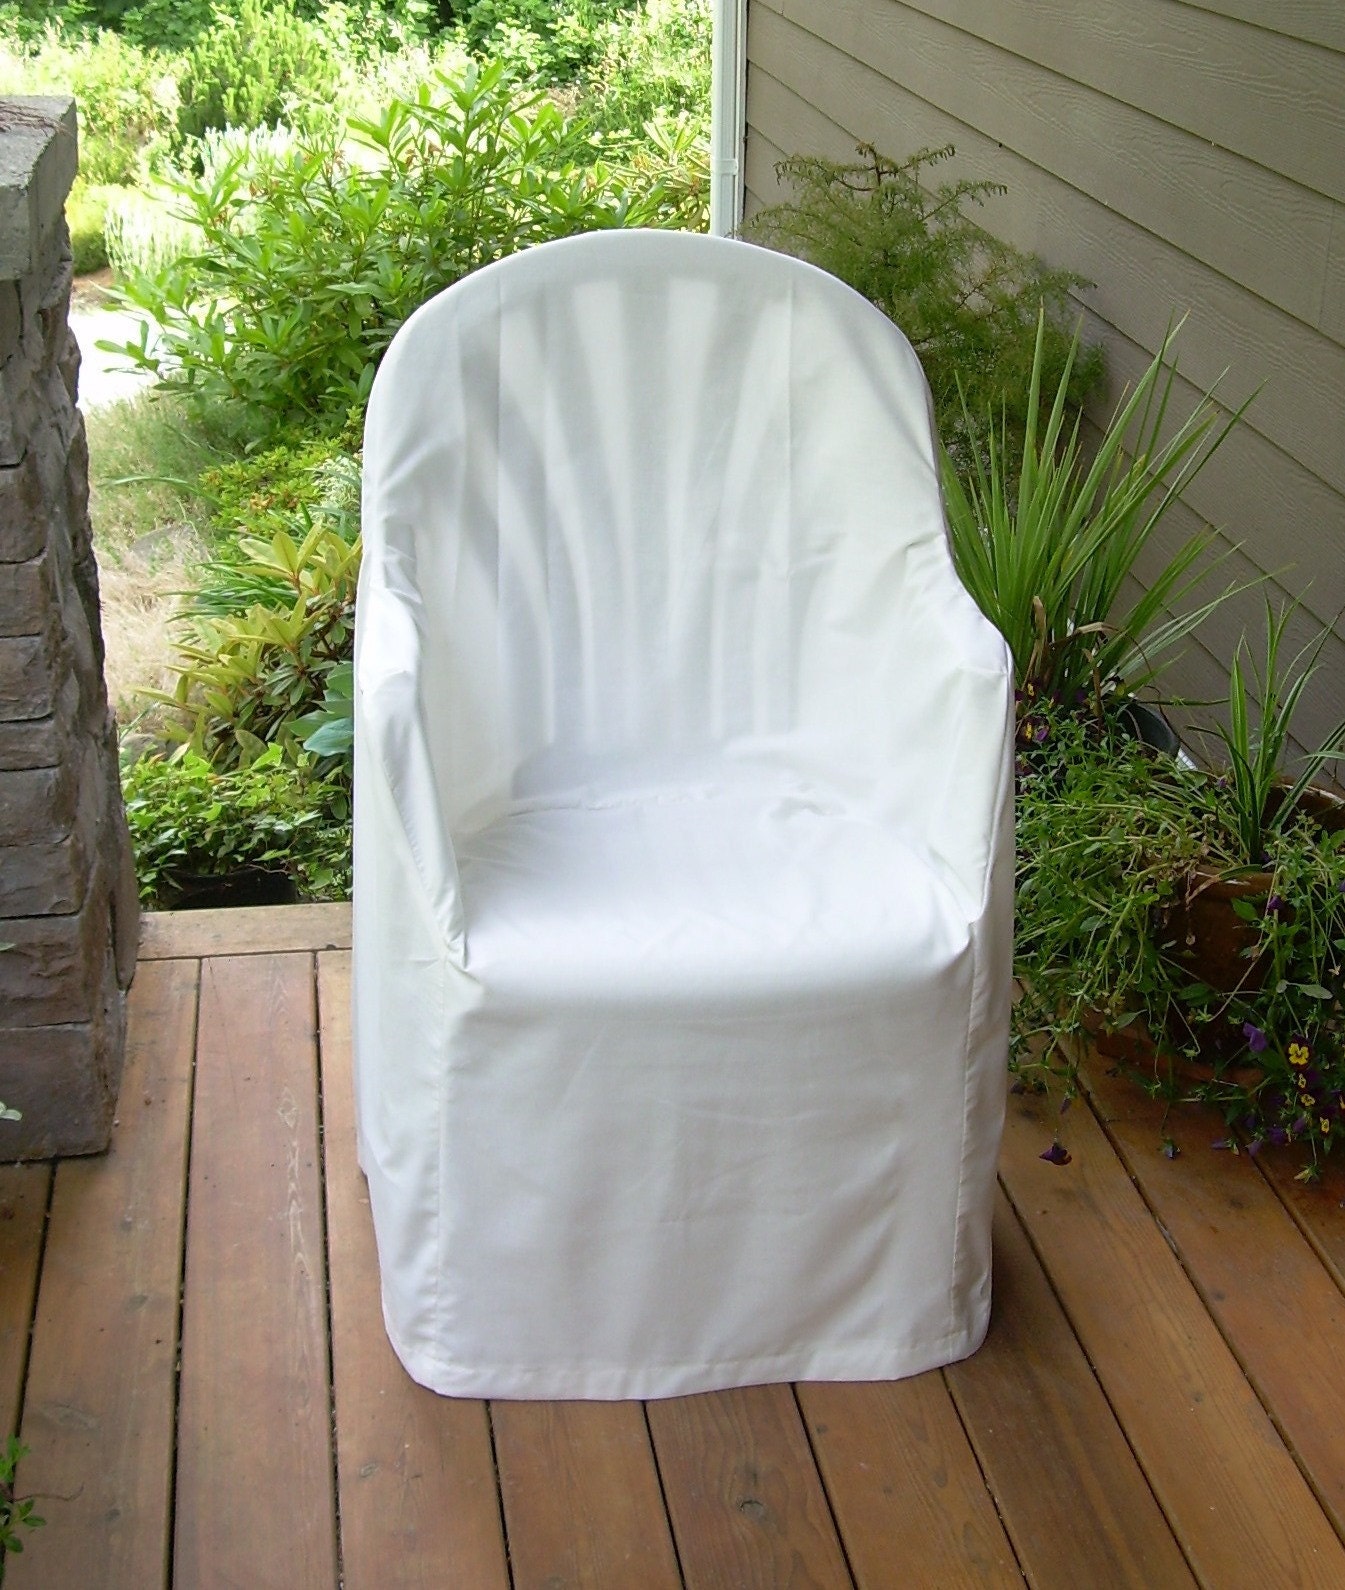 Hemp/Cotton Slipcover for Outdoor Plastic Chair